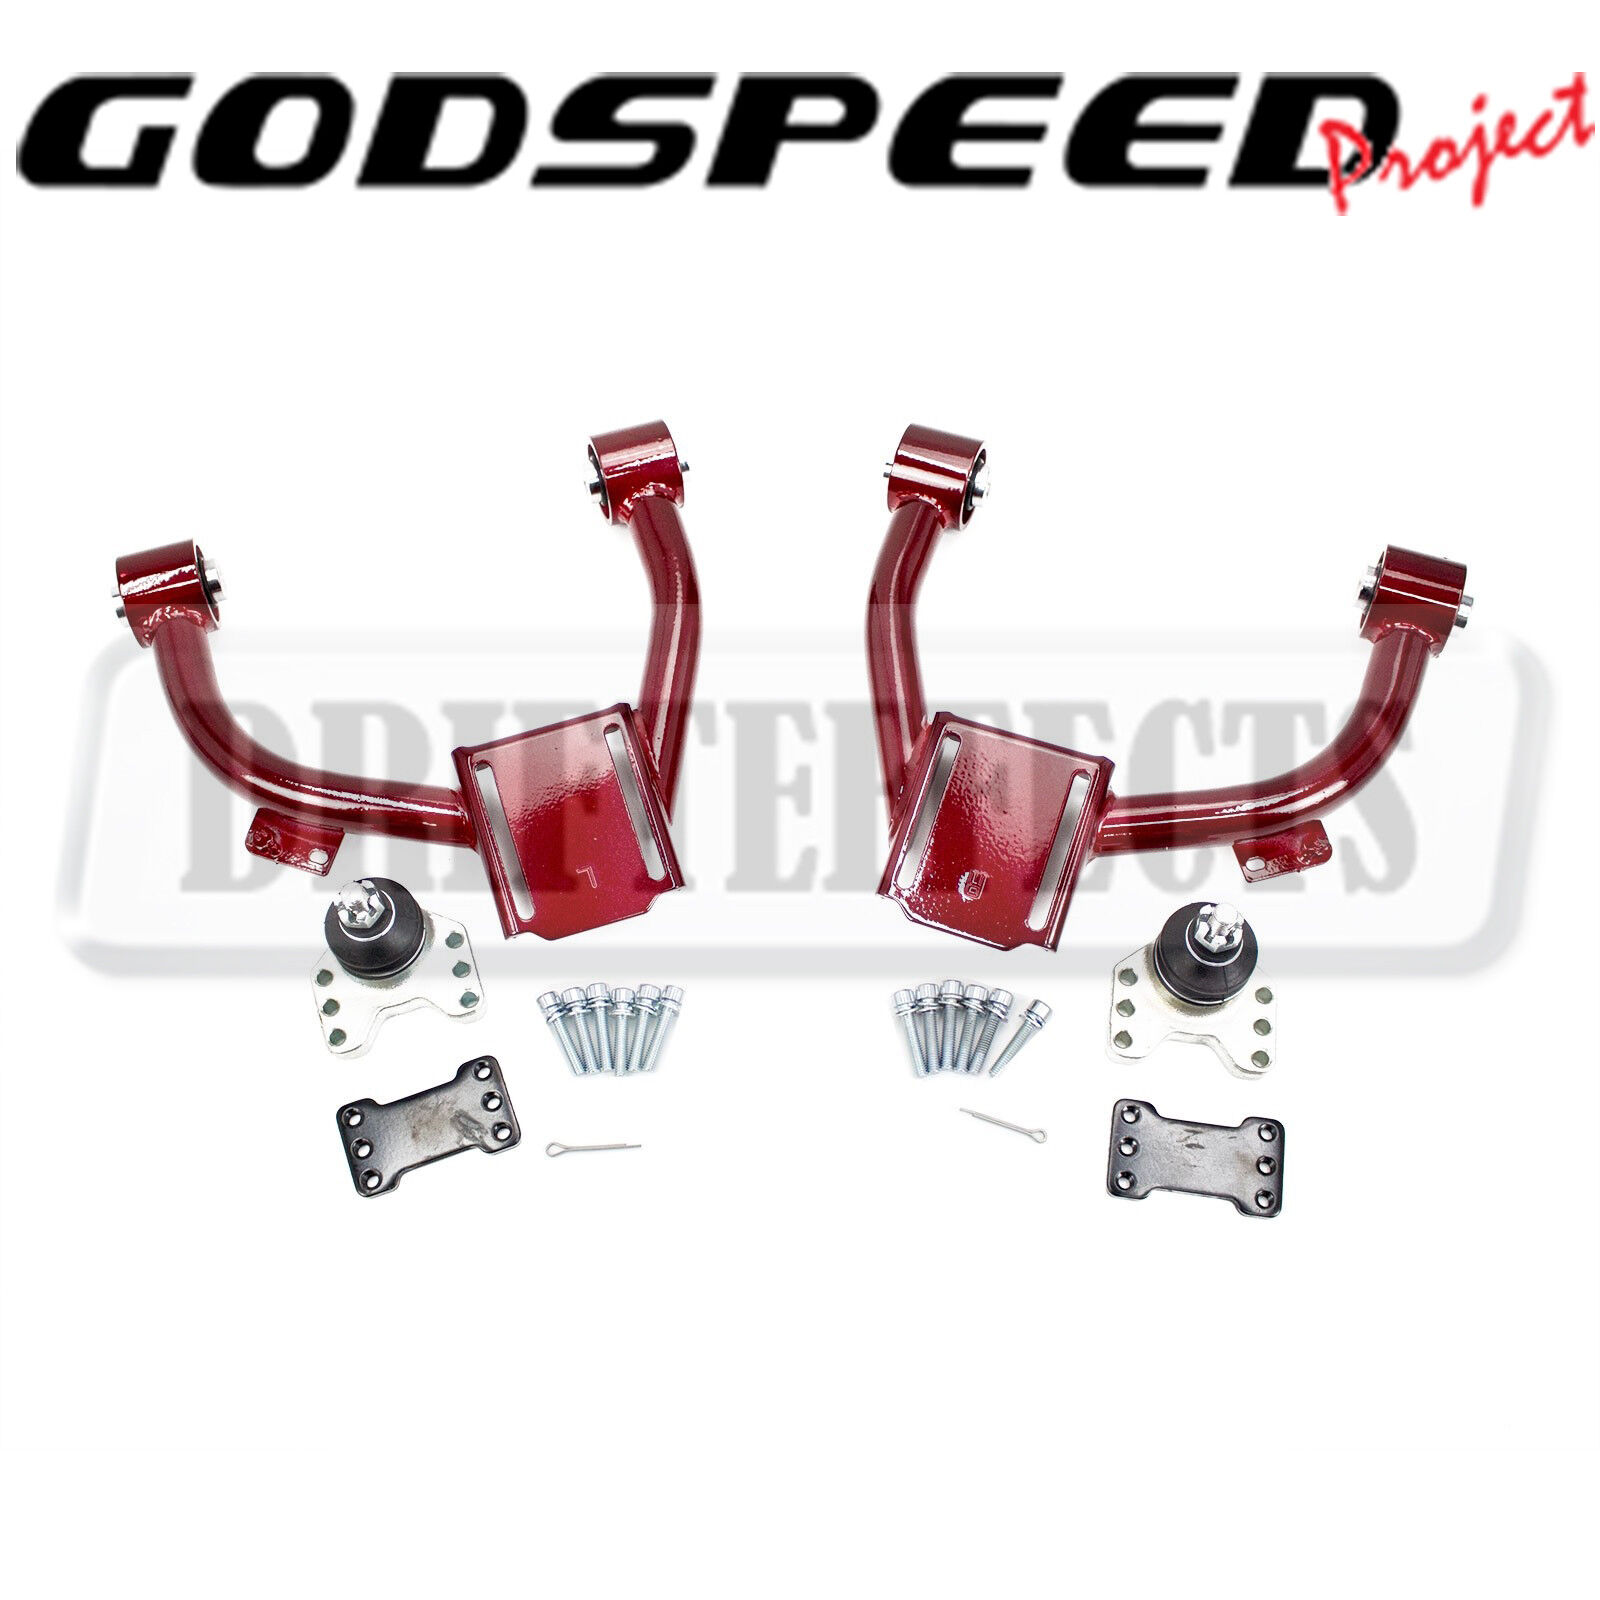 For 98-02 HONDA ACCORD Godspeed Adjustable Front Upper Camber Arm Kit Alignment